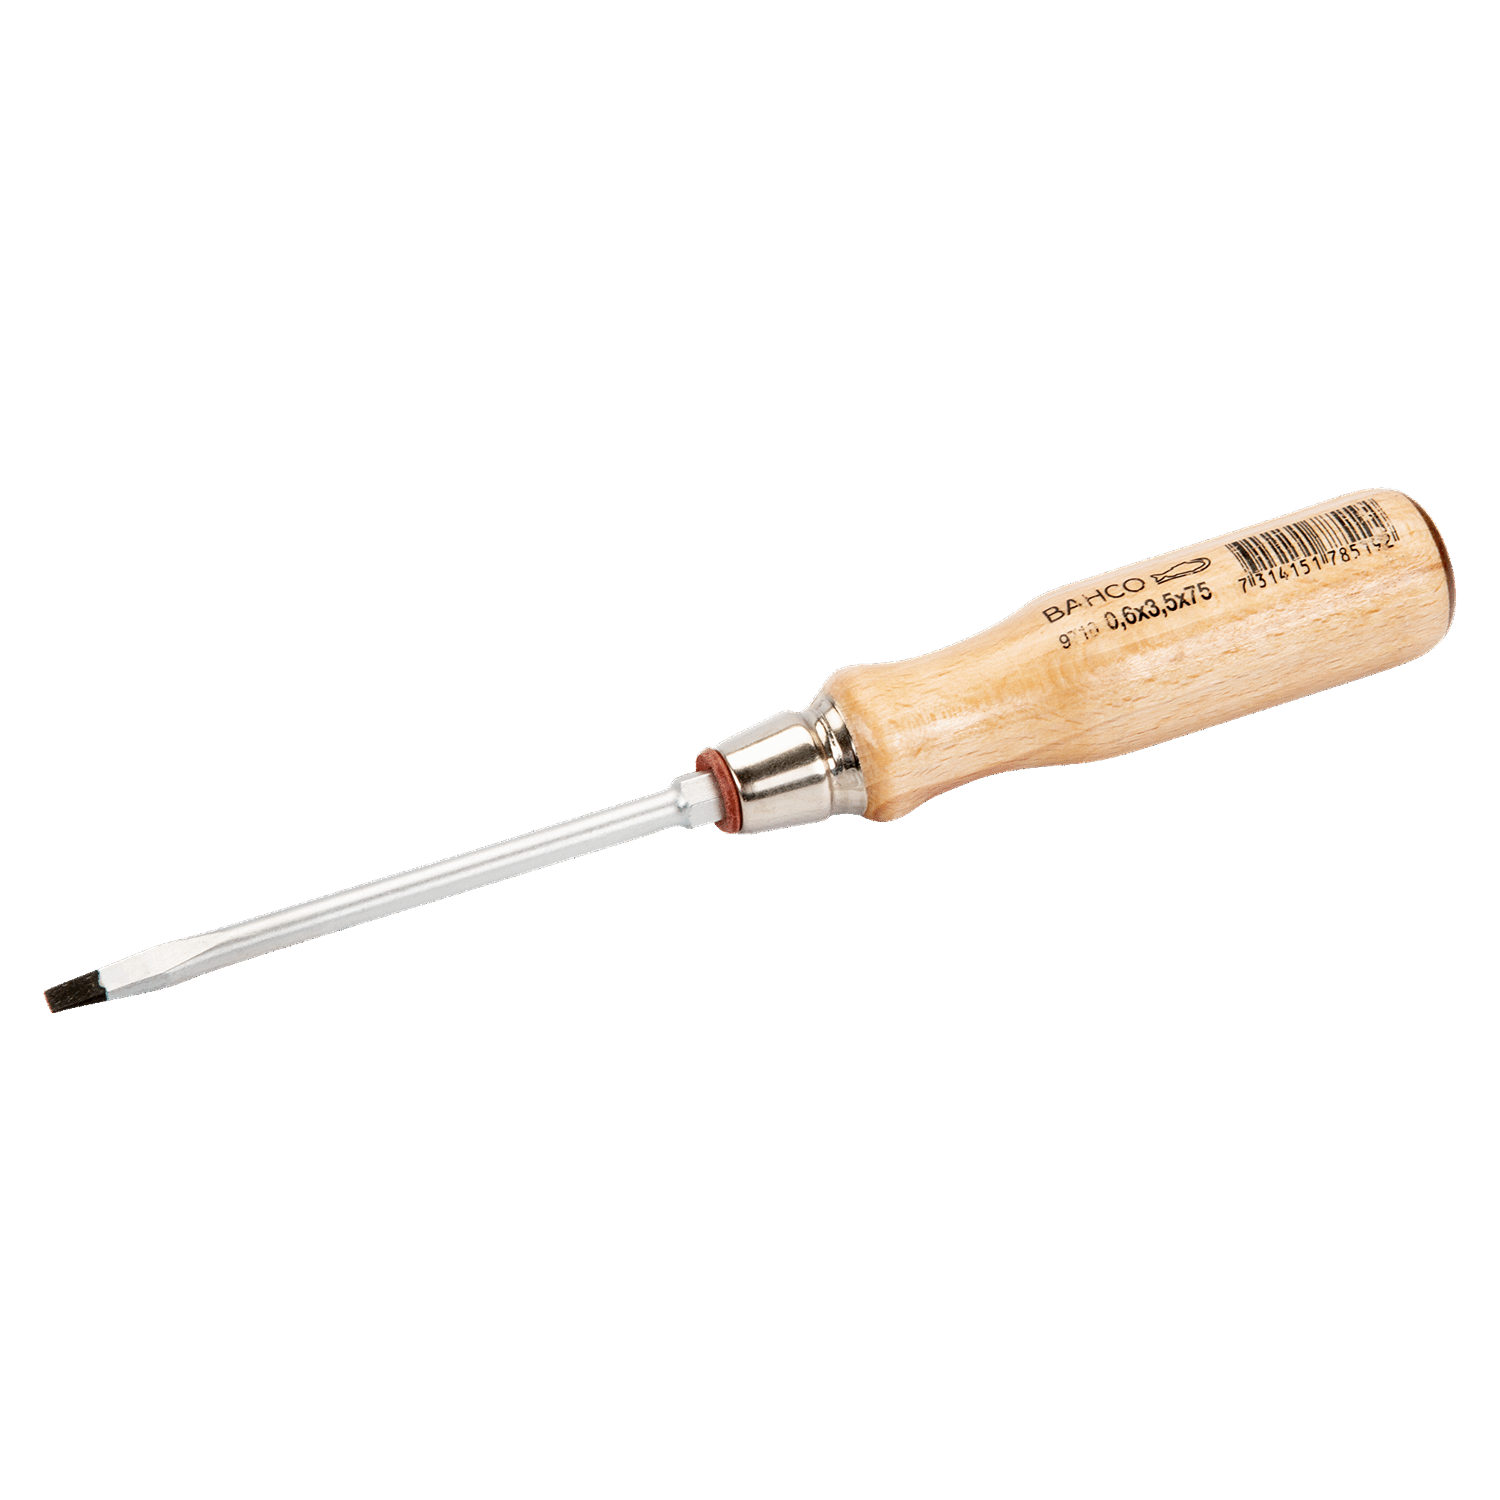 BAHCO 9710 Slotted Flat Tipped Screwdriver with Wooden Handle - Premium Flat Tipped Screwdriver from BAHCO - Shop now at Yew Aik.